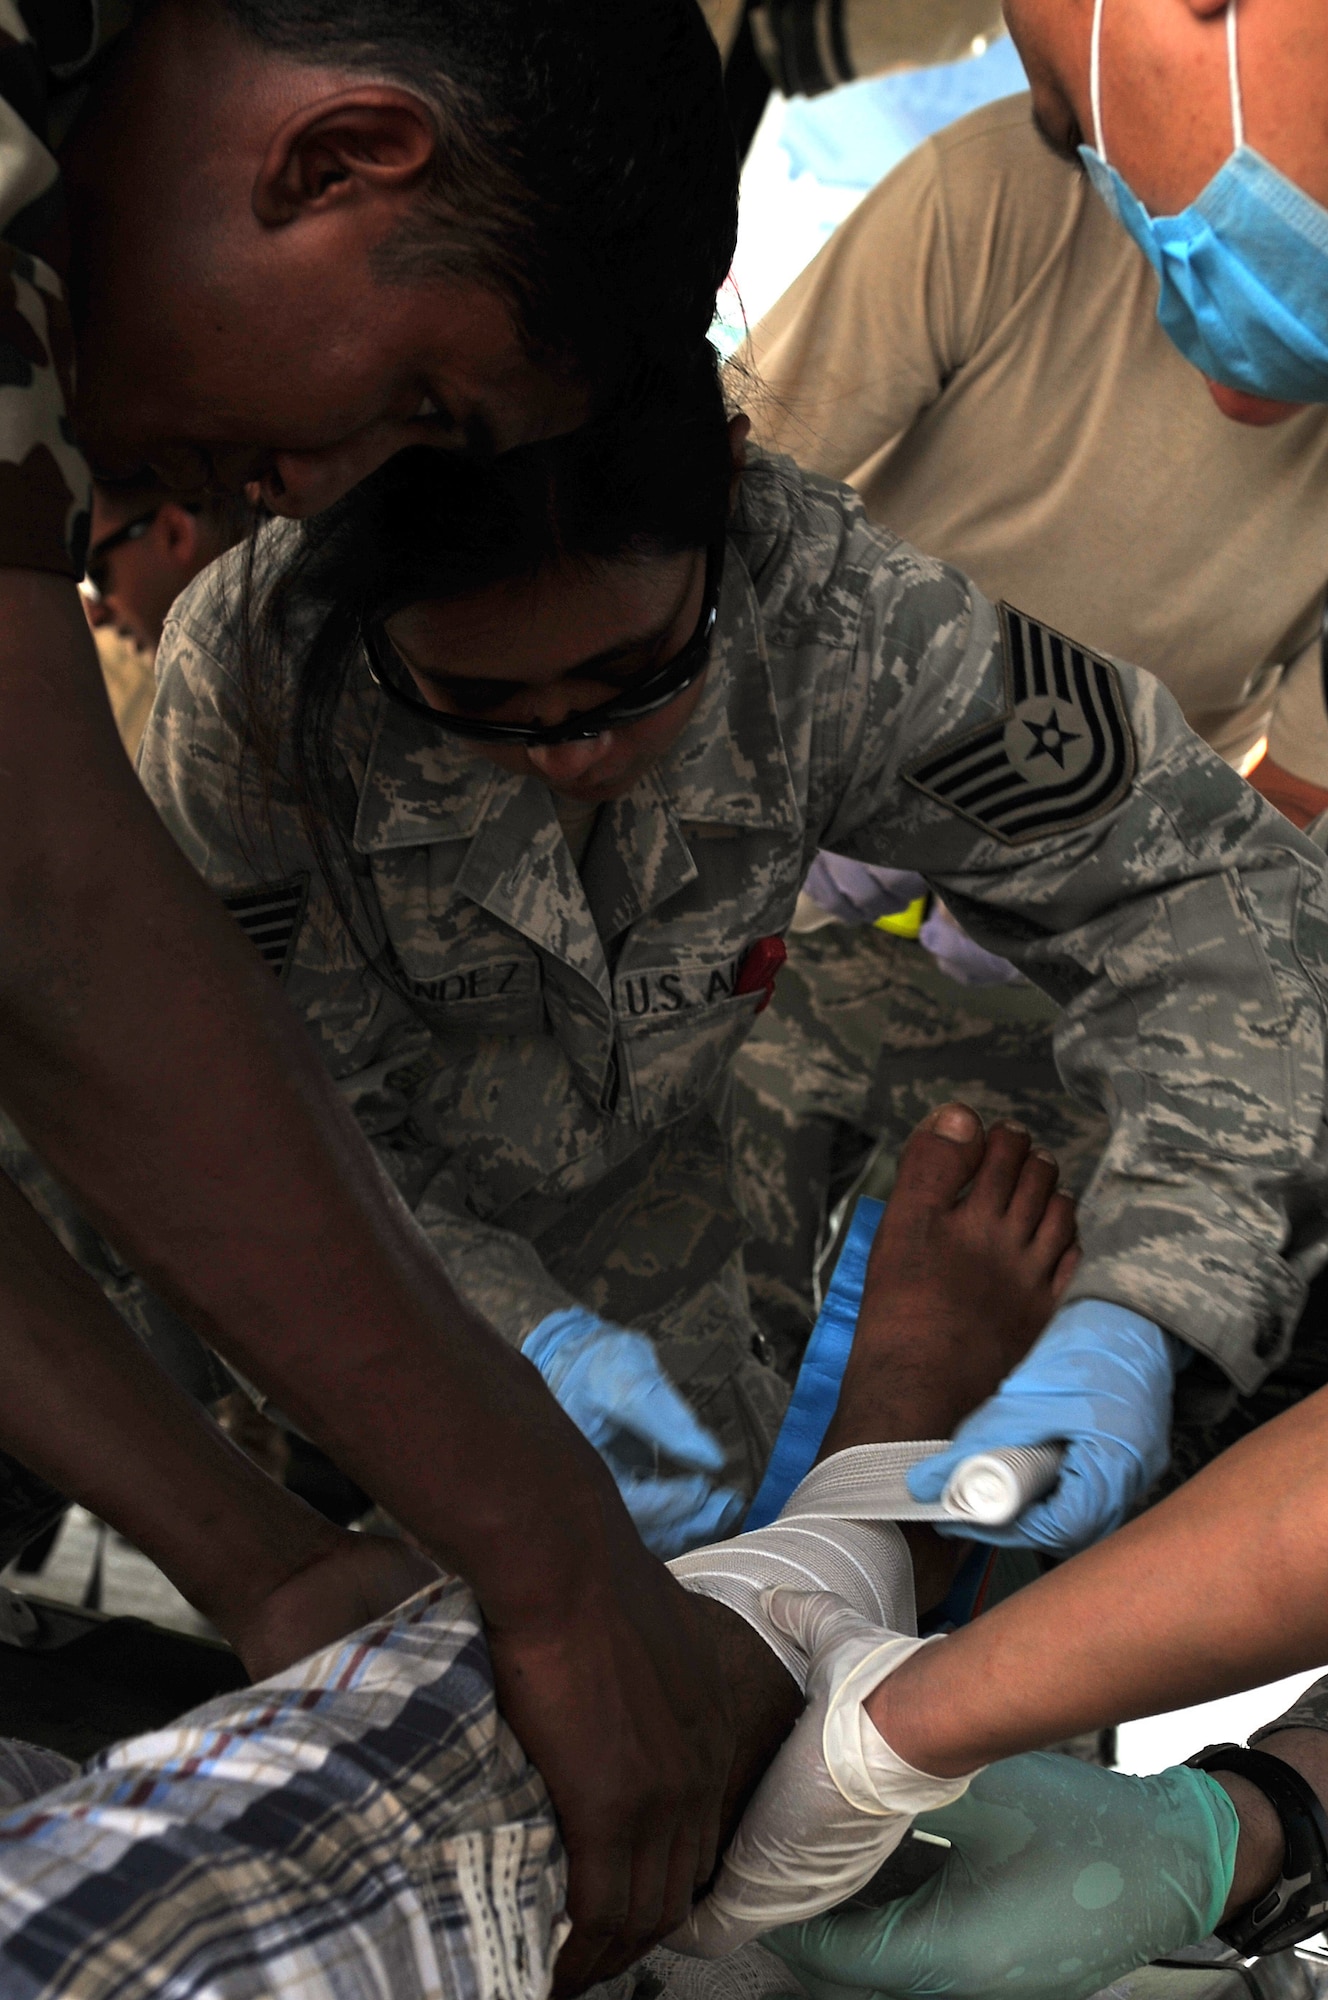 Tech Sgt. Honorata Fernandez, a 36th Contingency Response Group independent duty medical technician, helps Nepalese army soldiers splint an earthquake victim's leg at the Tribhuvan International Airport in Kathmandu, Nepal, May 12, 2015. Joint Task Force-505 members worked with the Nepalese army to triage, treat and transport patients after a 7.3-magnitude earthquake struck the region, following a 7.8-magnitude earthquake that devastated the nation April 25. (U.S. Air Force photo/Staff Sgt. Melissa B. White)